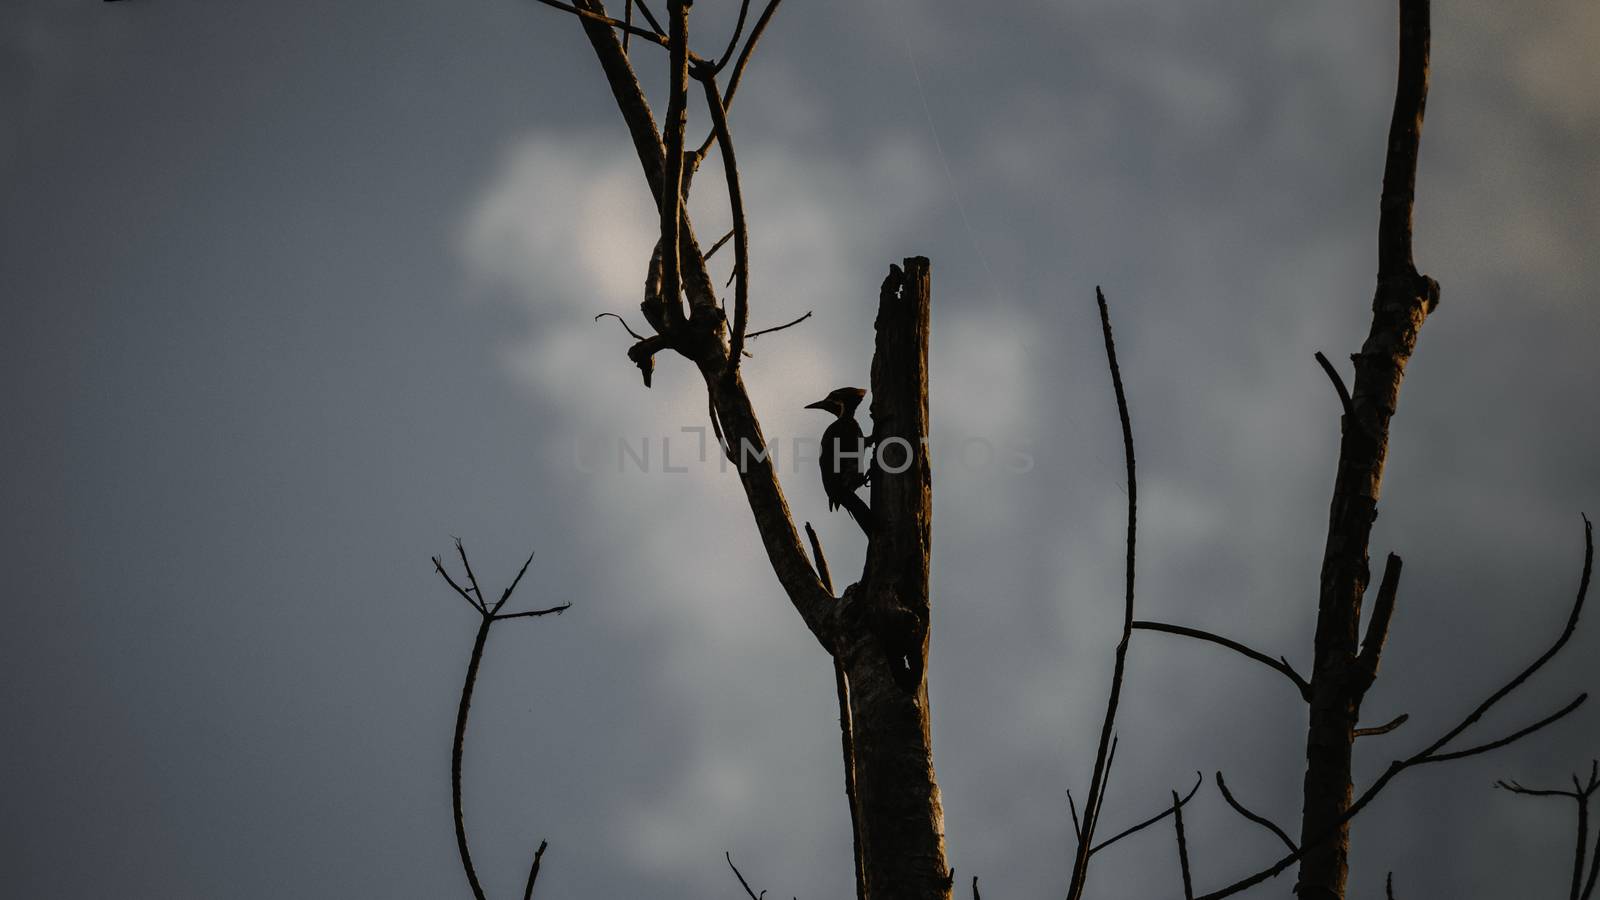 Woodpecker silhouette in the evening sun light hits tall tree branches by nilanka